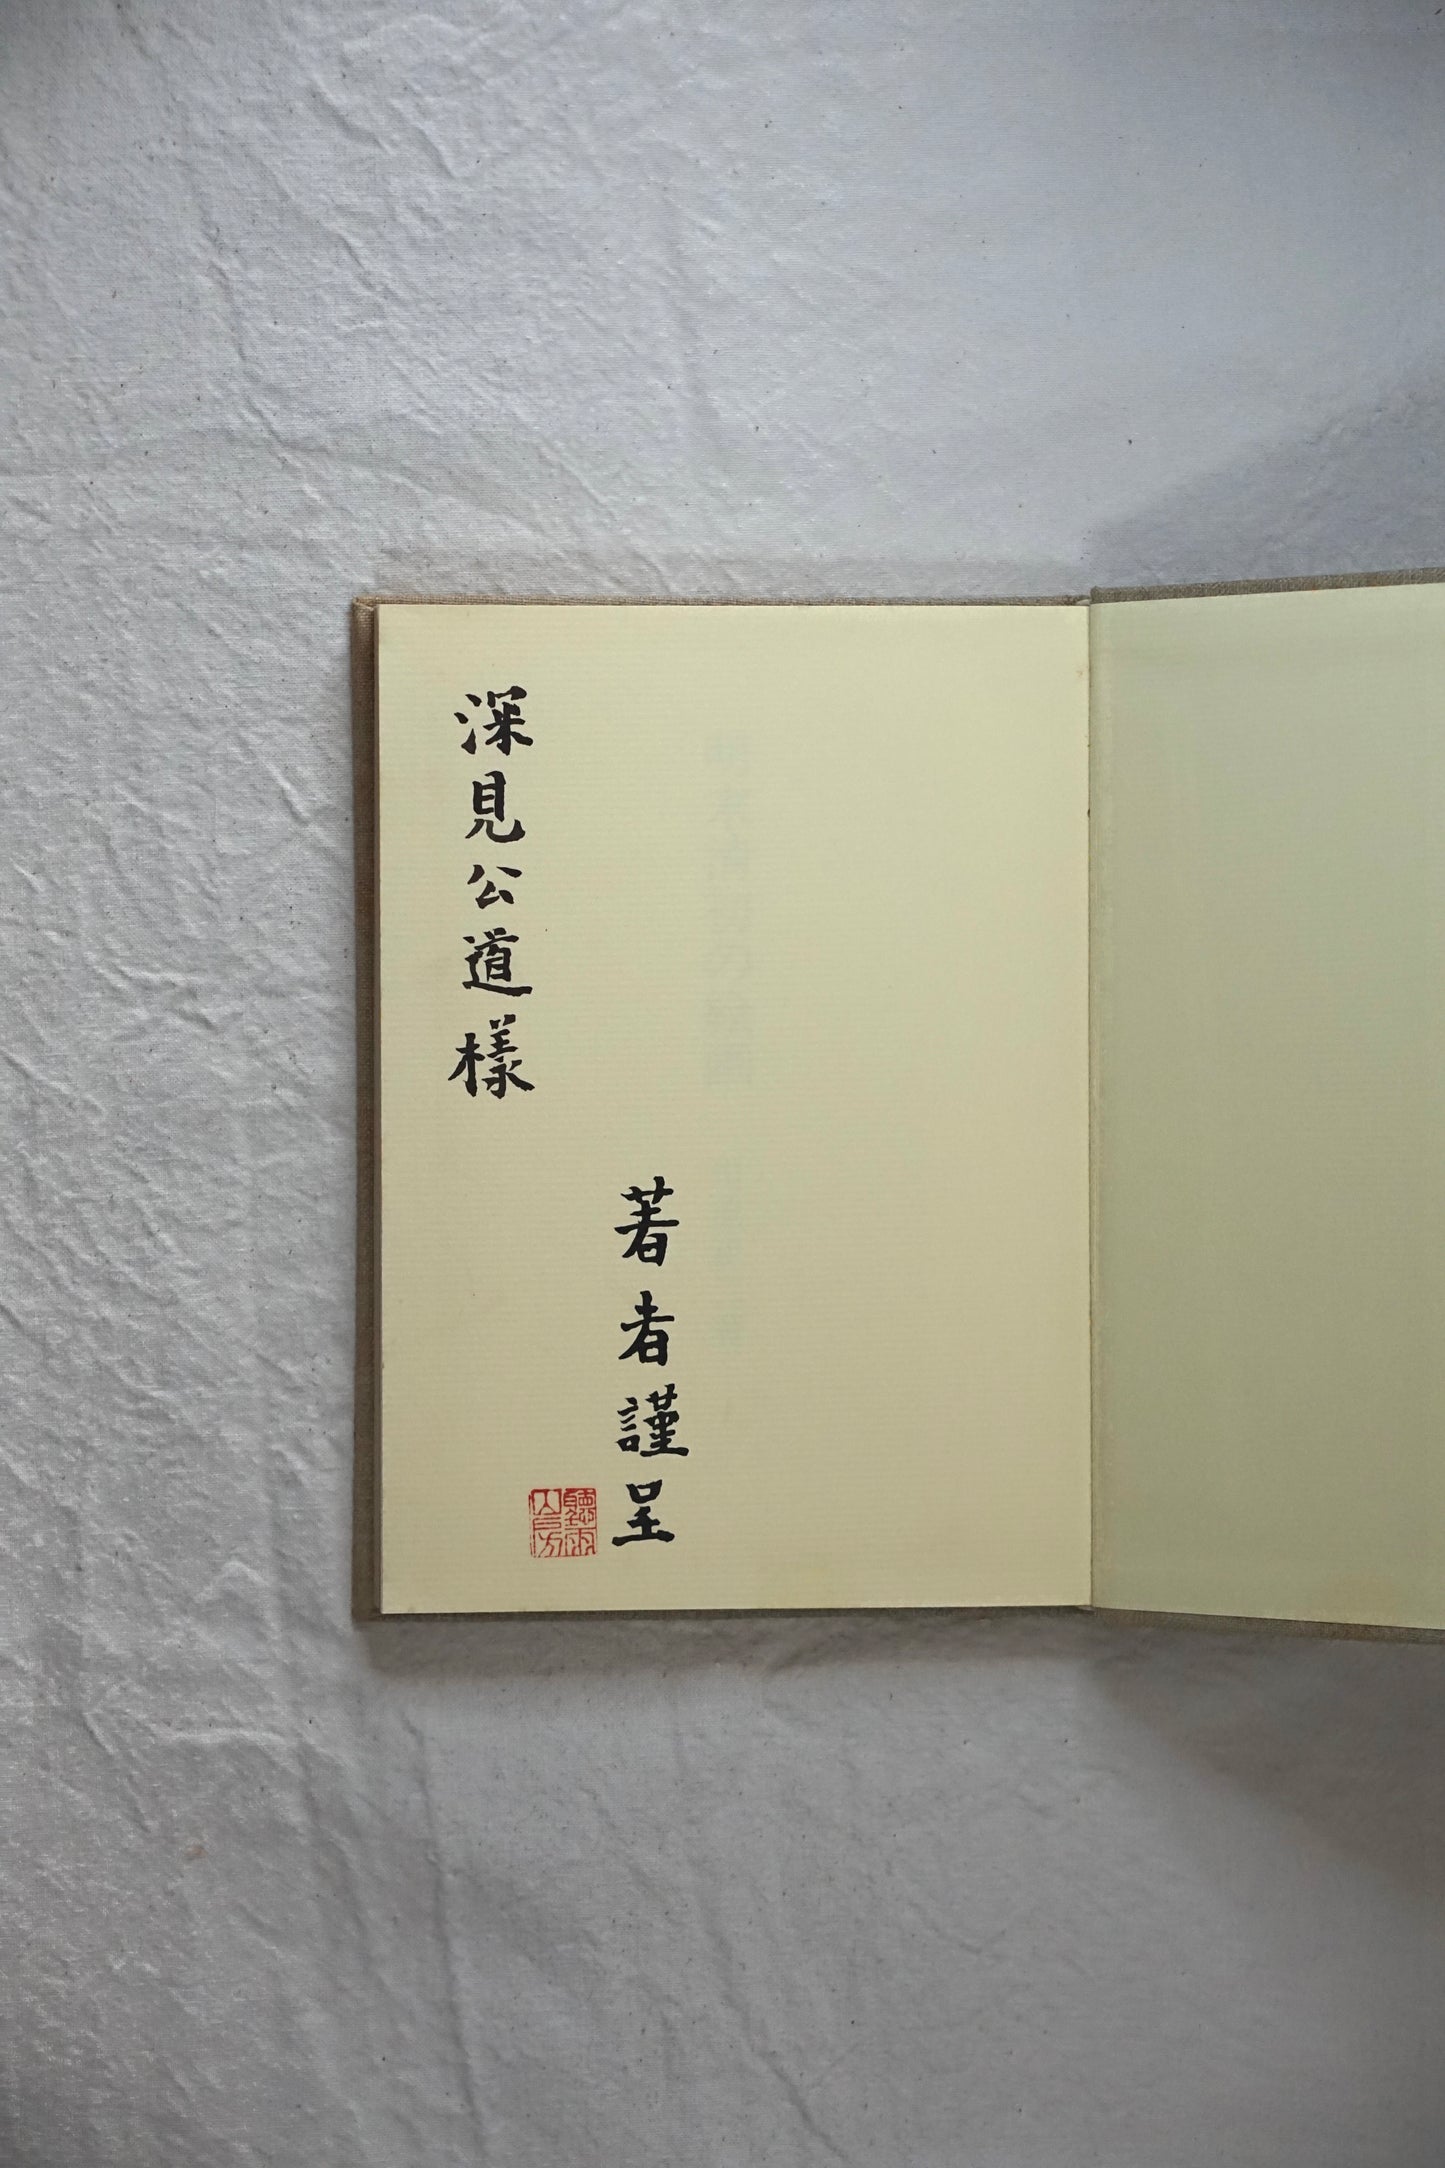 Paintings from the late Ming and early Qing Dynasties *A signed copy addressed to Kodo Fukami